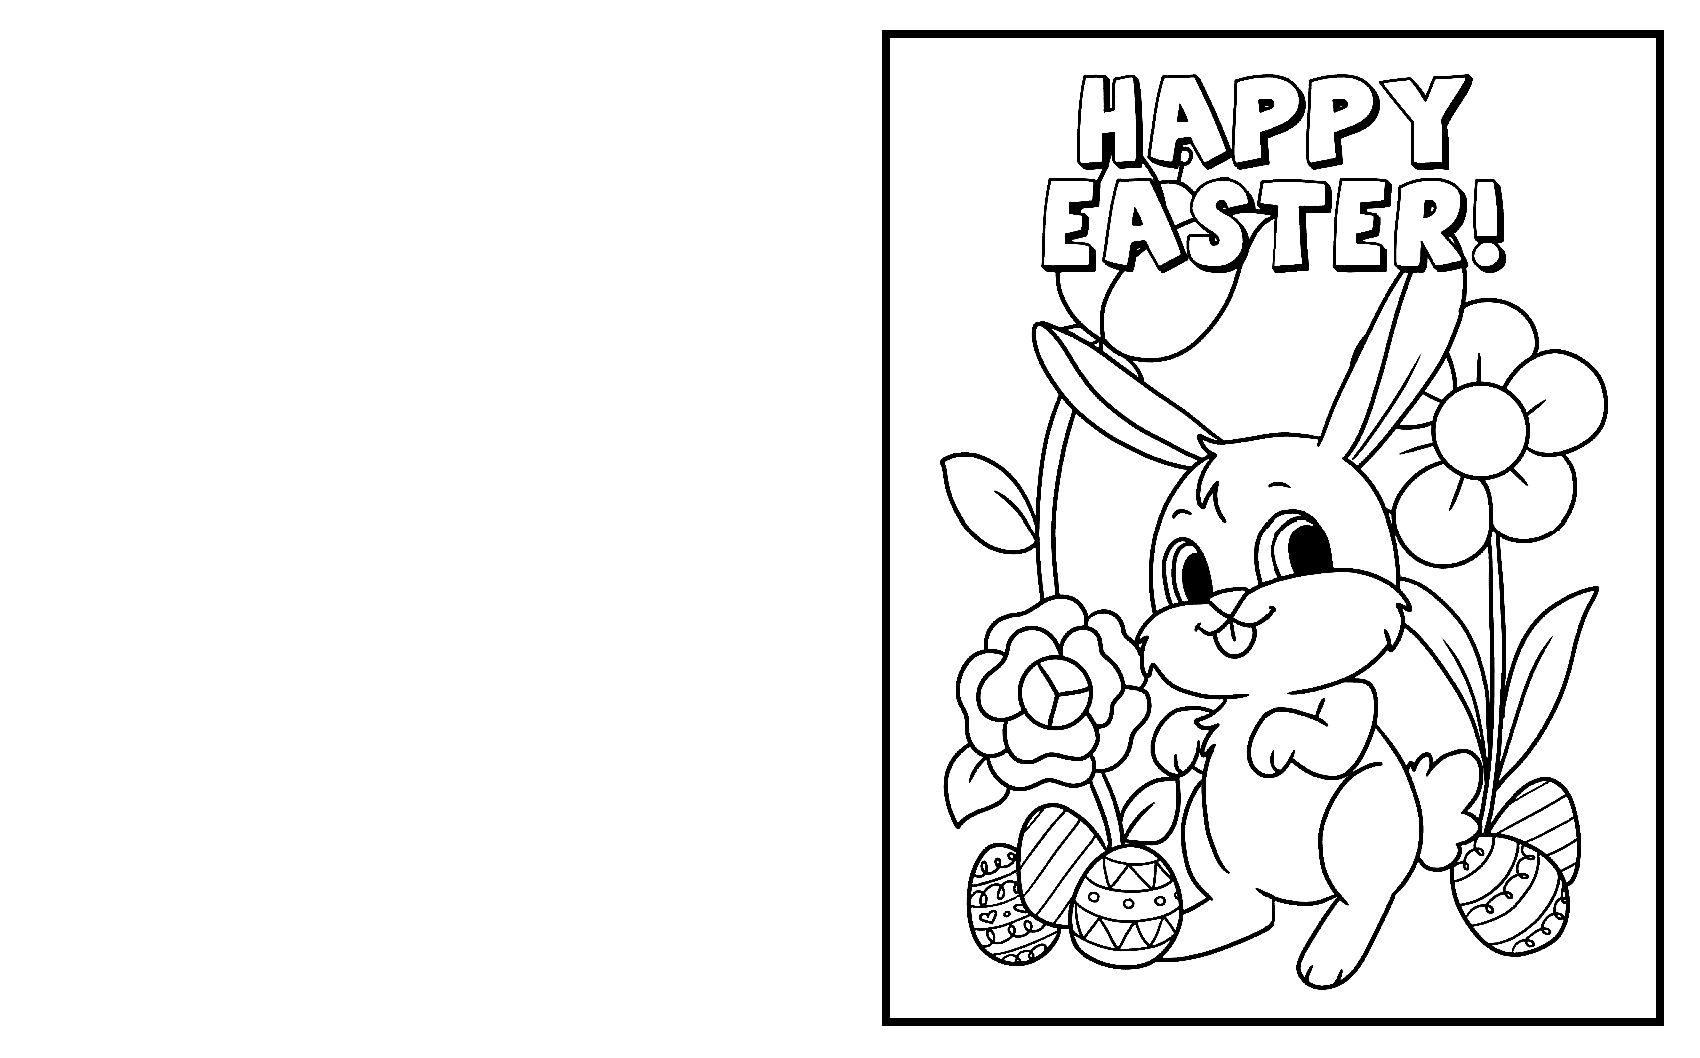 Cute Easter Bunny Card Coloring Page